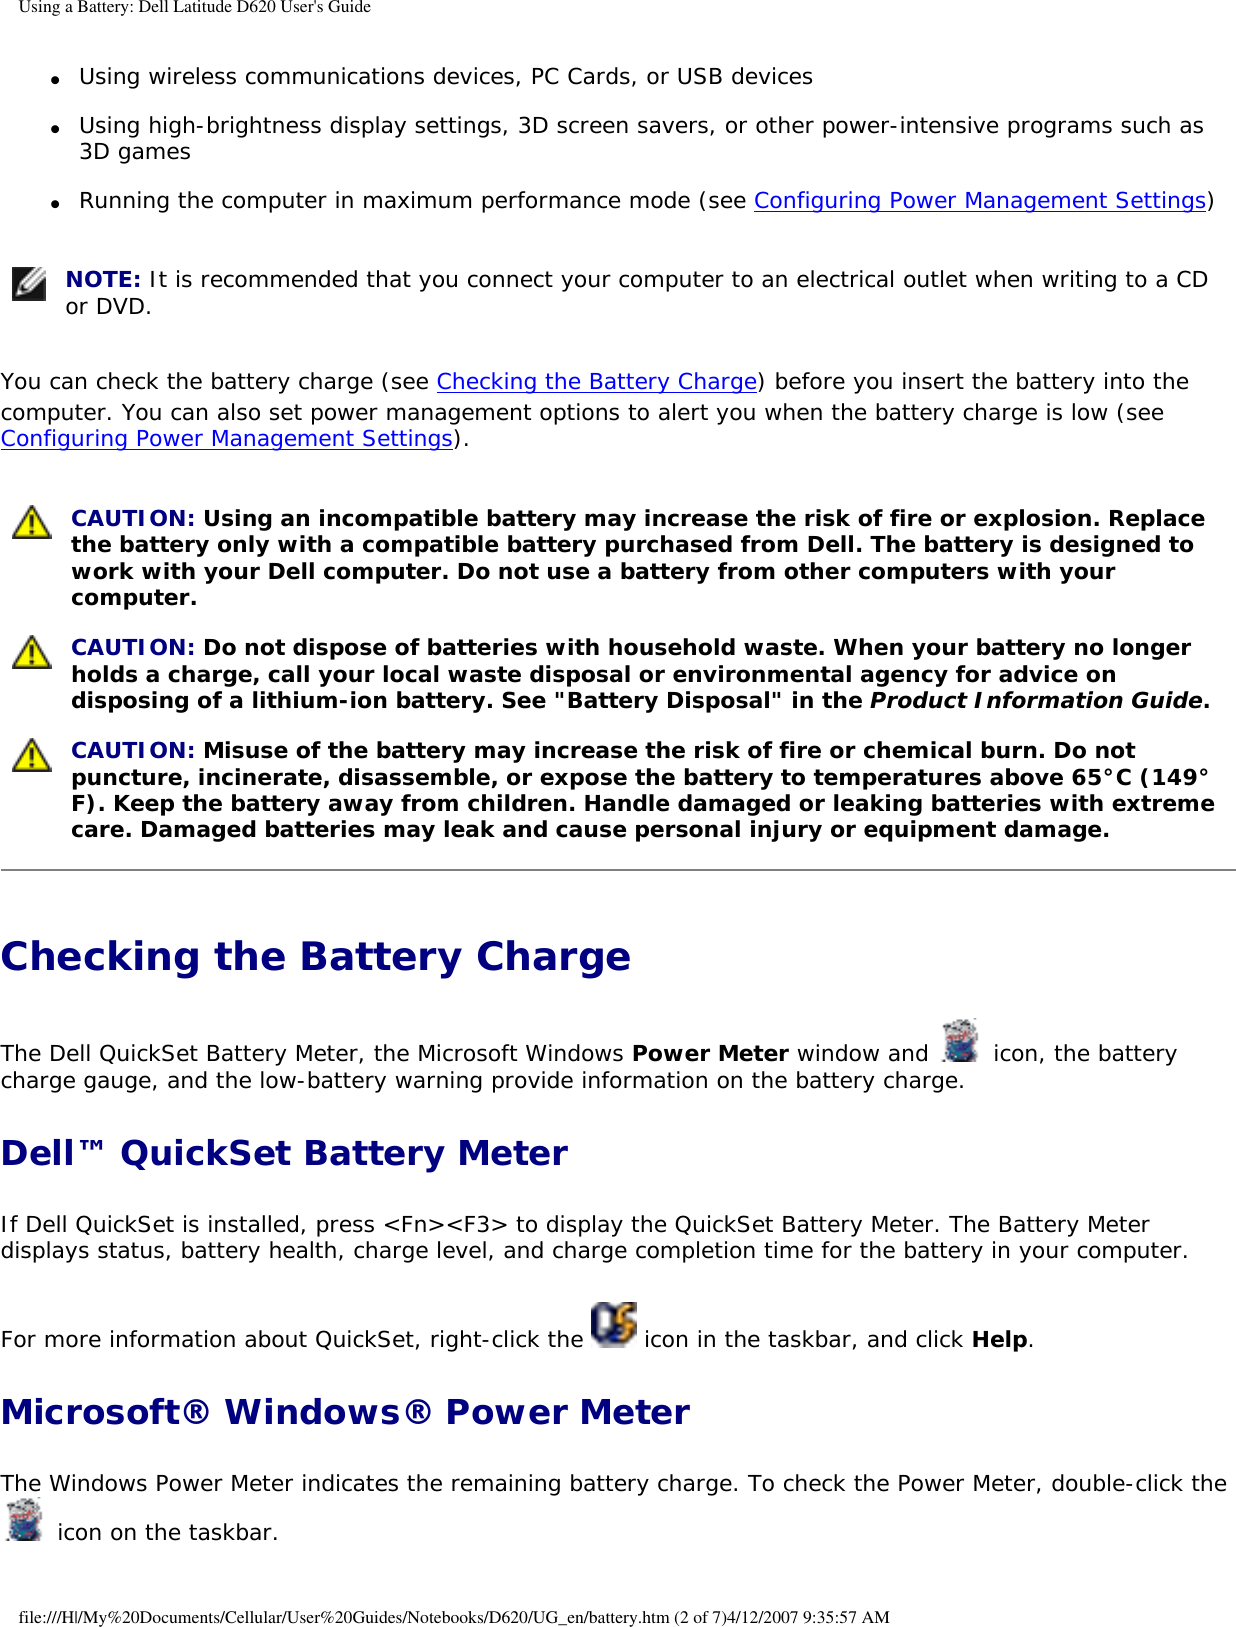 Using a Battery: Dell Latitude D620 User&apos;s Guide ●     Using wireless communications devices, PC Cards, or USB devices  ●     Using high-brightness display settings, 3D screen savers, or other power-intensive programs such as 3D games  ●     Running the computer in maximum performance mode (see Configuring Power Management Settings)   NOTE: It is recommended that you connect your computer to an electrical outlet when writing to a CD or DVD.You can check the battery charge (see Checking the Battery Charge) before you insert the battery into the computer. You can also set power management options to alert you when the battery charge is low (see Configuring Power Management Settings). CAUTION: Using an incompatible battery may increase the risk of fire or explosion. Replace the battery only with a compatible battery purchased from Dell. The battery is designed to work with your Dell computer. Do not use a battery from other computers with your computer.  CAUTION: Do not dispose of batteries with household waste. When your battery no longer holds a charge, call your local waste disposal or environmental agency for advice on disposing of a lithium-ion battery. See &quot;Battery Disposal&quot; in the Product Information Guide. CAUTION: Misuse of the battery may increase the risk of fire or chemical burn. Do not puncture, incinerate, disassemble, or expose the battery to temperatures above 65°C (149°F). Keep the battery away from children. Handle damaged or leaking batteries with extreme care. Damaged batteries may leak and cause personal injury or equipment damage. Checking the Battery Charge The Dell QuickSet Battery Meter, the Microsoft Windows Power Meter window and   icon, the battery charge gauge, and the low-battery warning provide information on the battery charge.Dell™ QuickSet Battery MeterIf Dell QuickSet is installed, press &lt;Fn&gt;&lt;F3&gt; to display the QuickSet Battery Meter. The Battery Meter displays status, battery health, charge level, and charge completion time for the battery in your computer. For more information about QuickSet, right-click the   icon in the taskbar, and click Help.Microsoft® Windows® Power MeterThe Windows Power Meter indicates the remaining battery charge. To check the Power Meter, double-click the  icon on the taskbar. file:///H|/My%20Documents/Cellular/User%20Guides/Notebooks/D620/UG_en/battery.htm (2 of 7)4/12/2007 9:35:57 AM